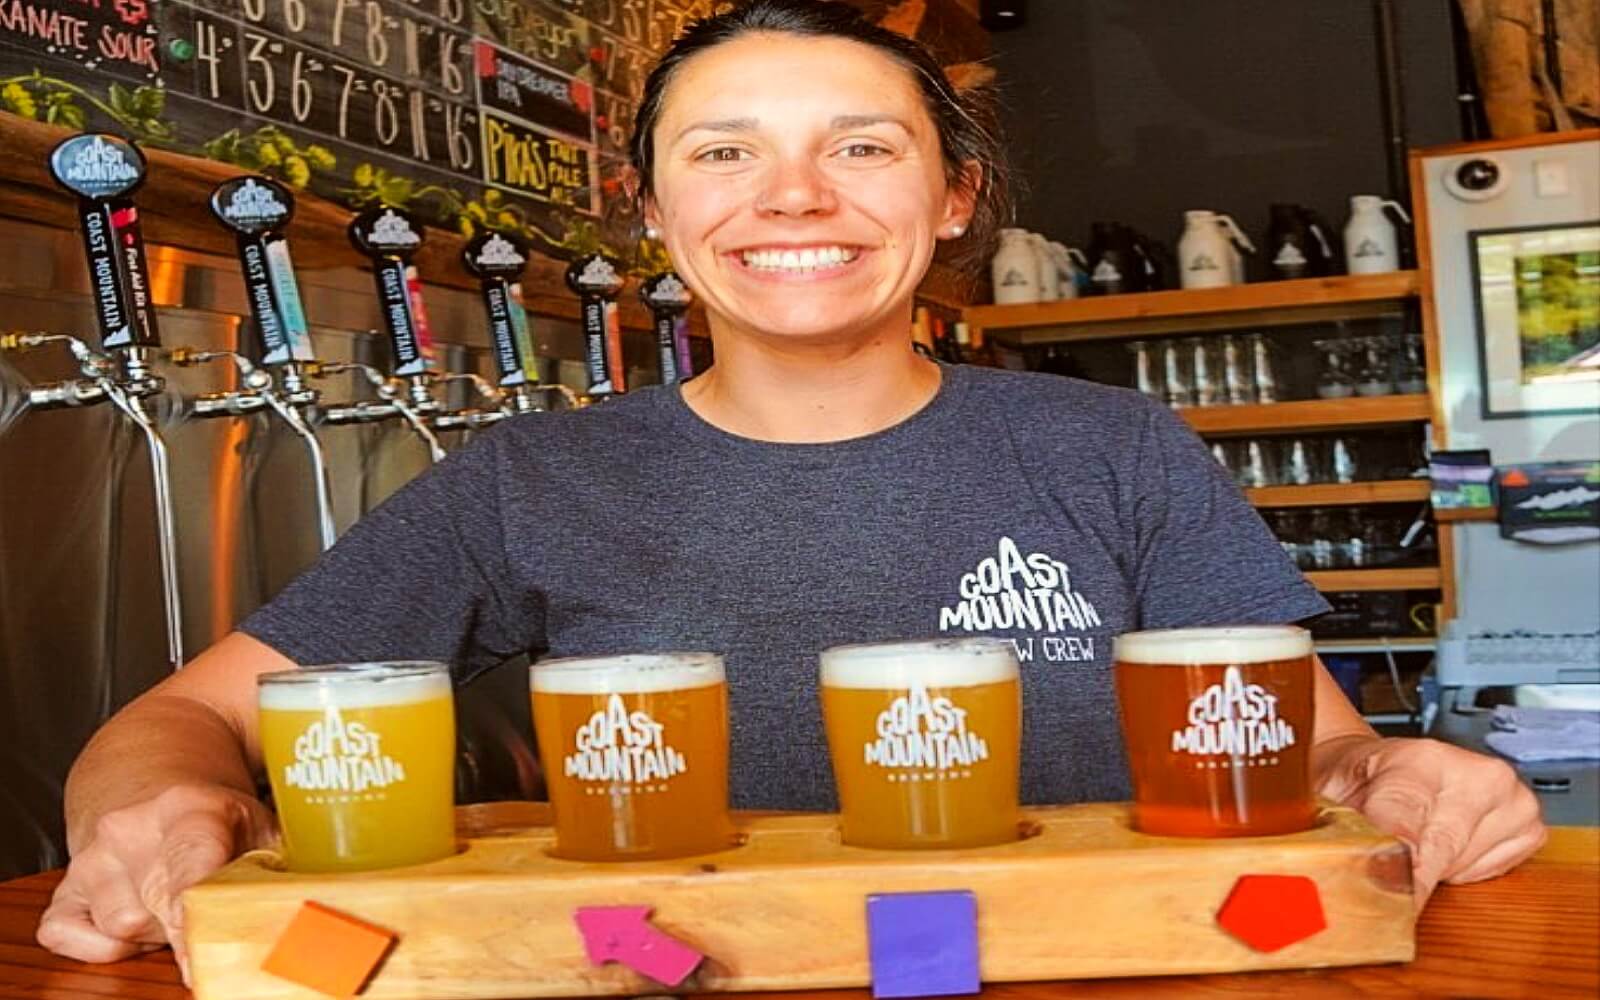 A bartender serves a flight of Coast Mountain beers